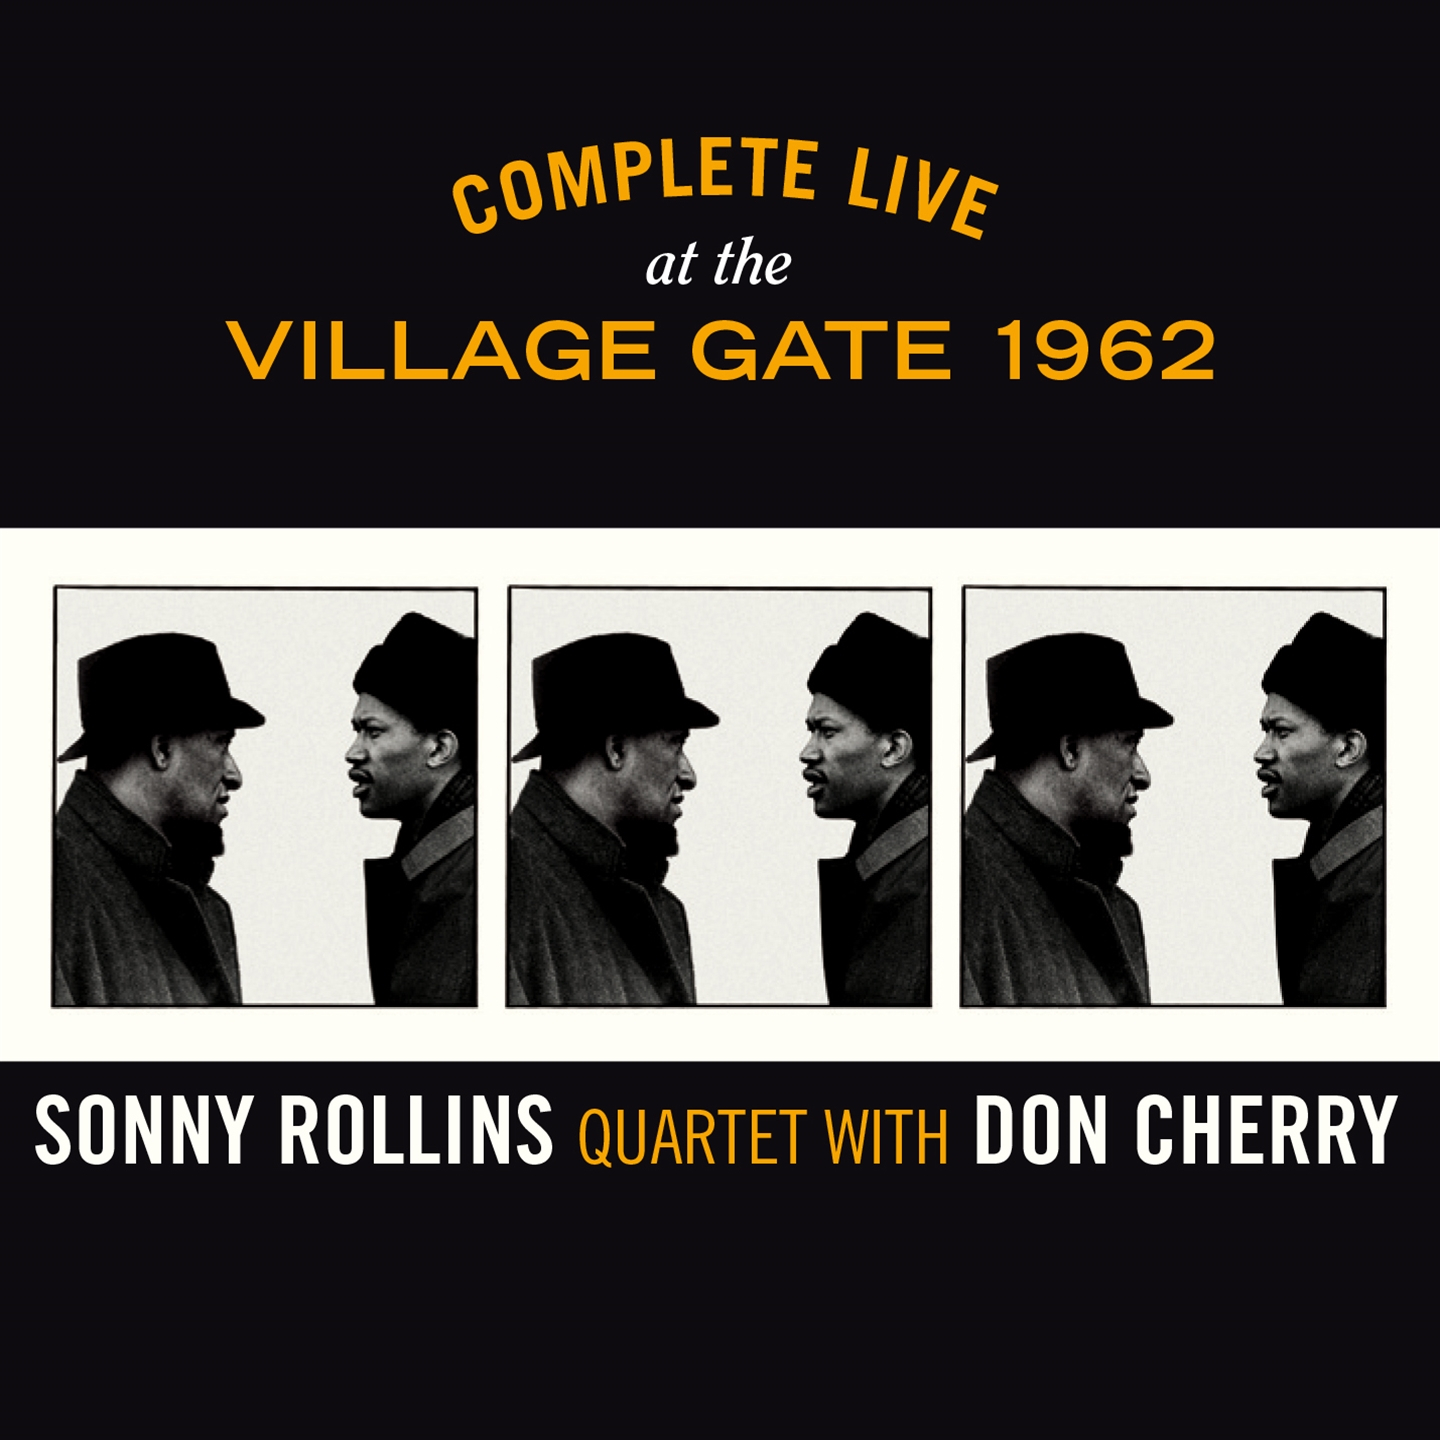 COMPLETE LIVE AT THE VILLAGE GATE 1962 WITH DON CHERRY [LTD.ED. 6-CD BOX]